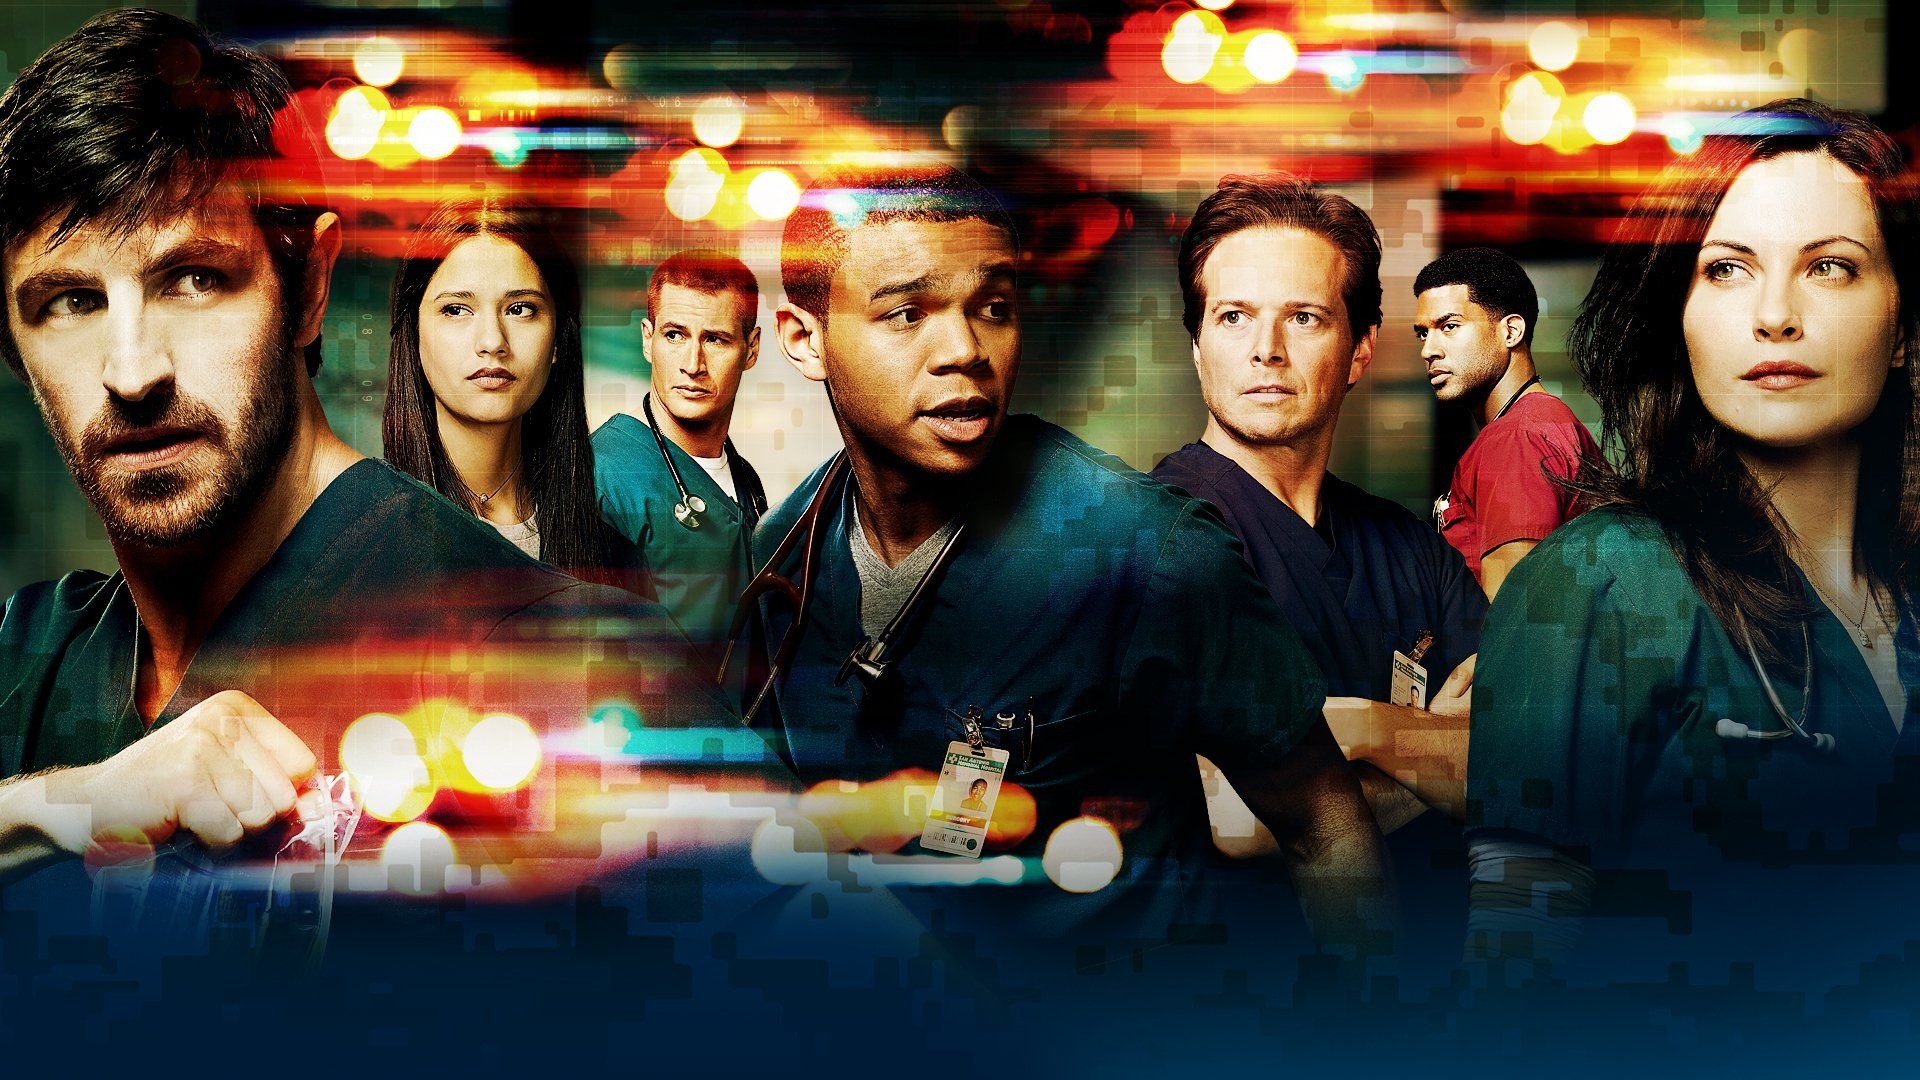 The Night Shift TV Series, Night shift watch episodes, Online streaming, ReelGood reviews, 1920x1080 Full HD Desktop